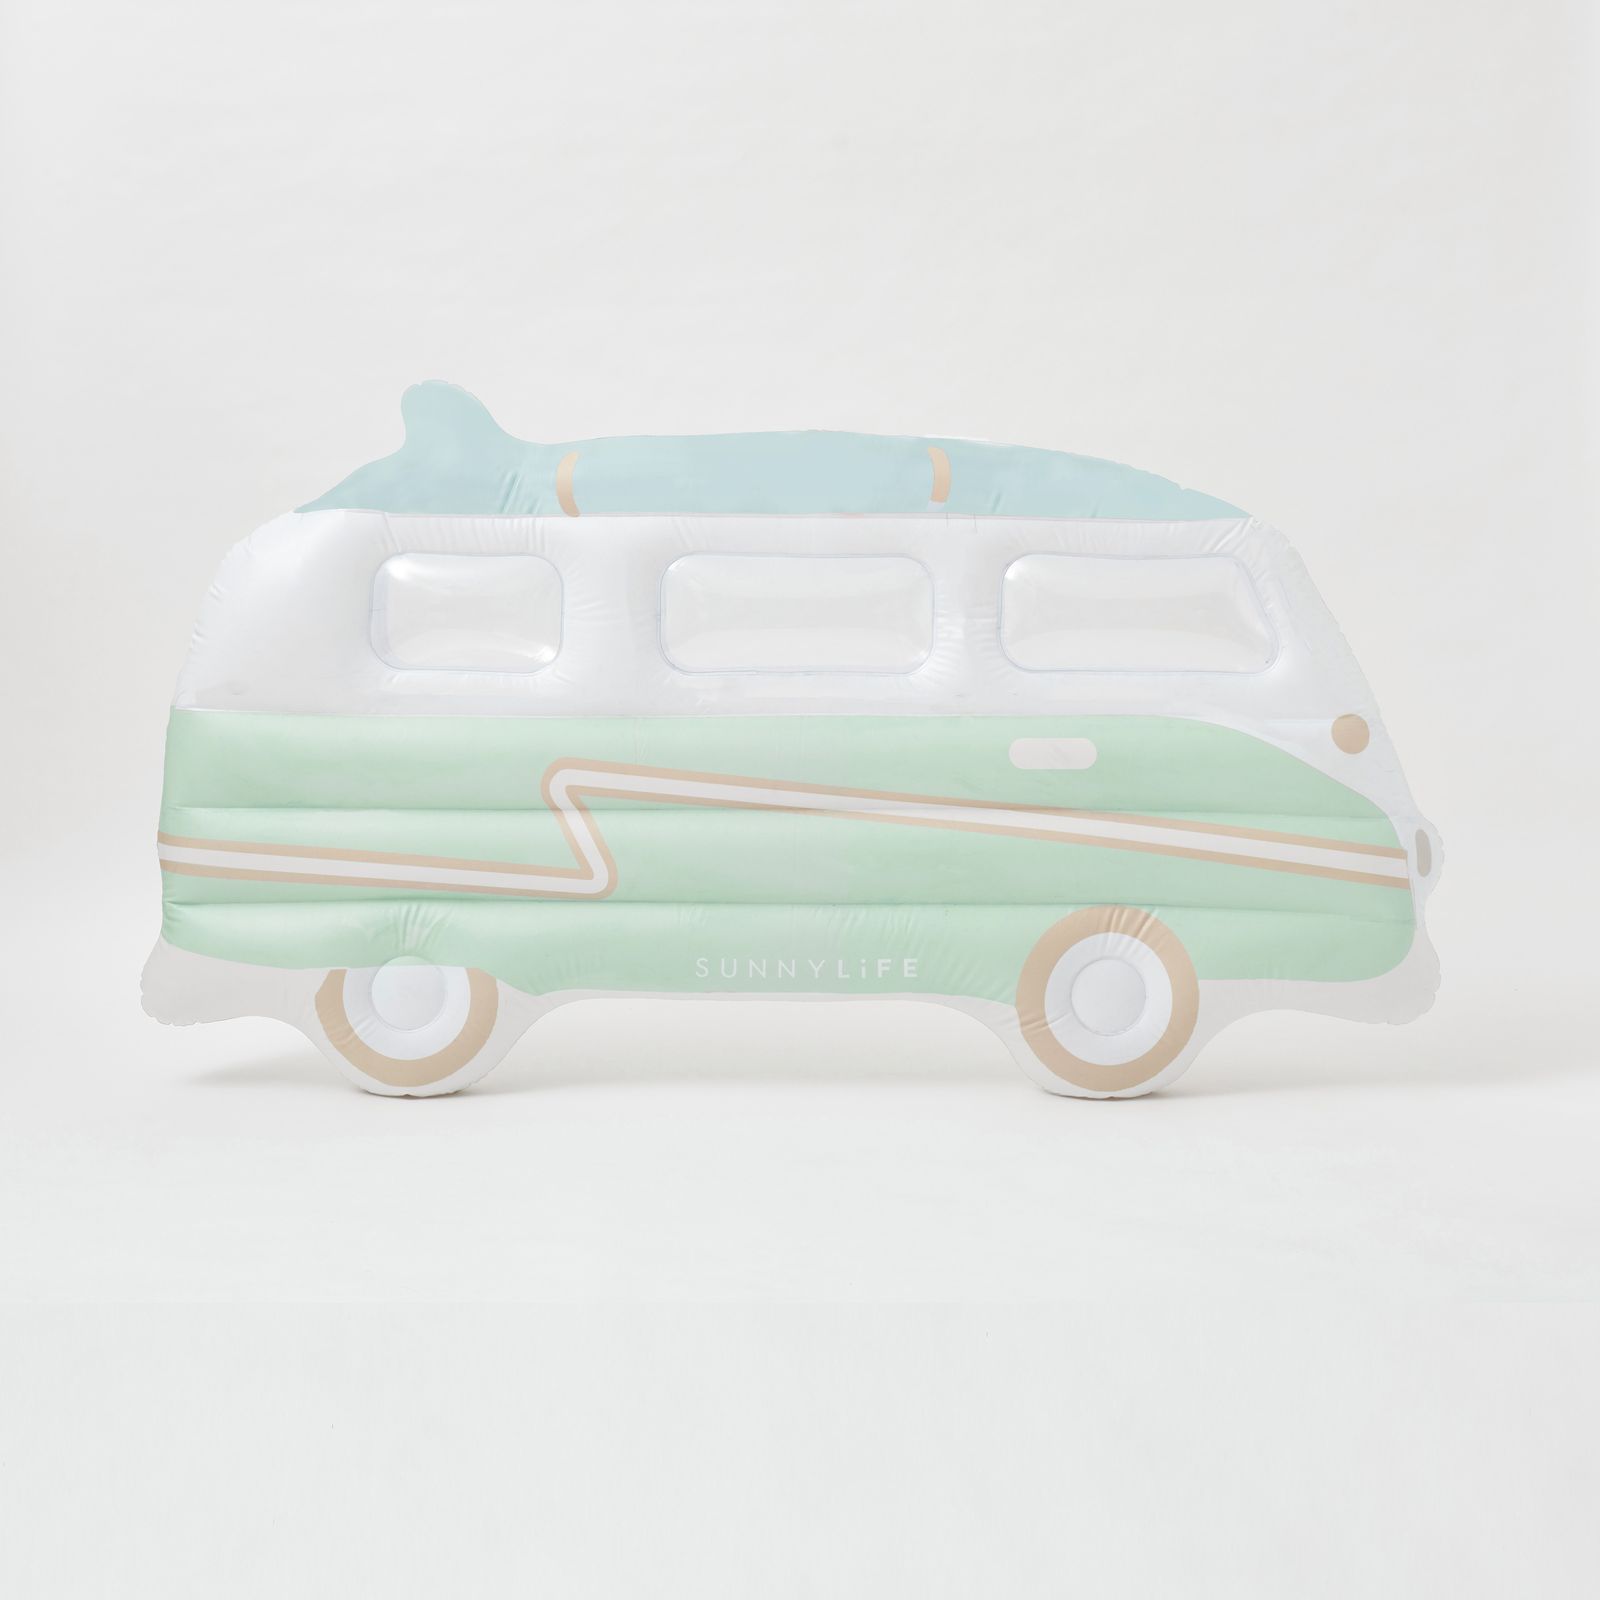 Pool Floats Luxe Luchtbed Drijvend Campervan